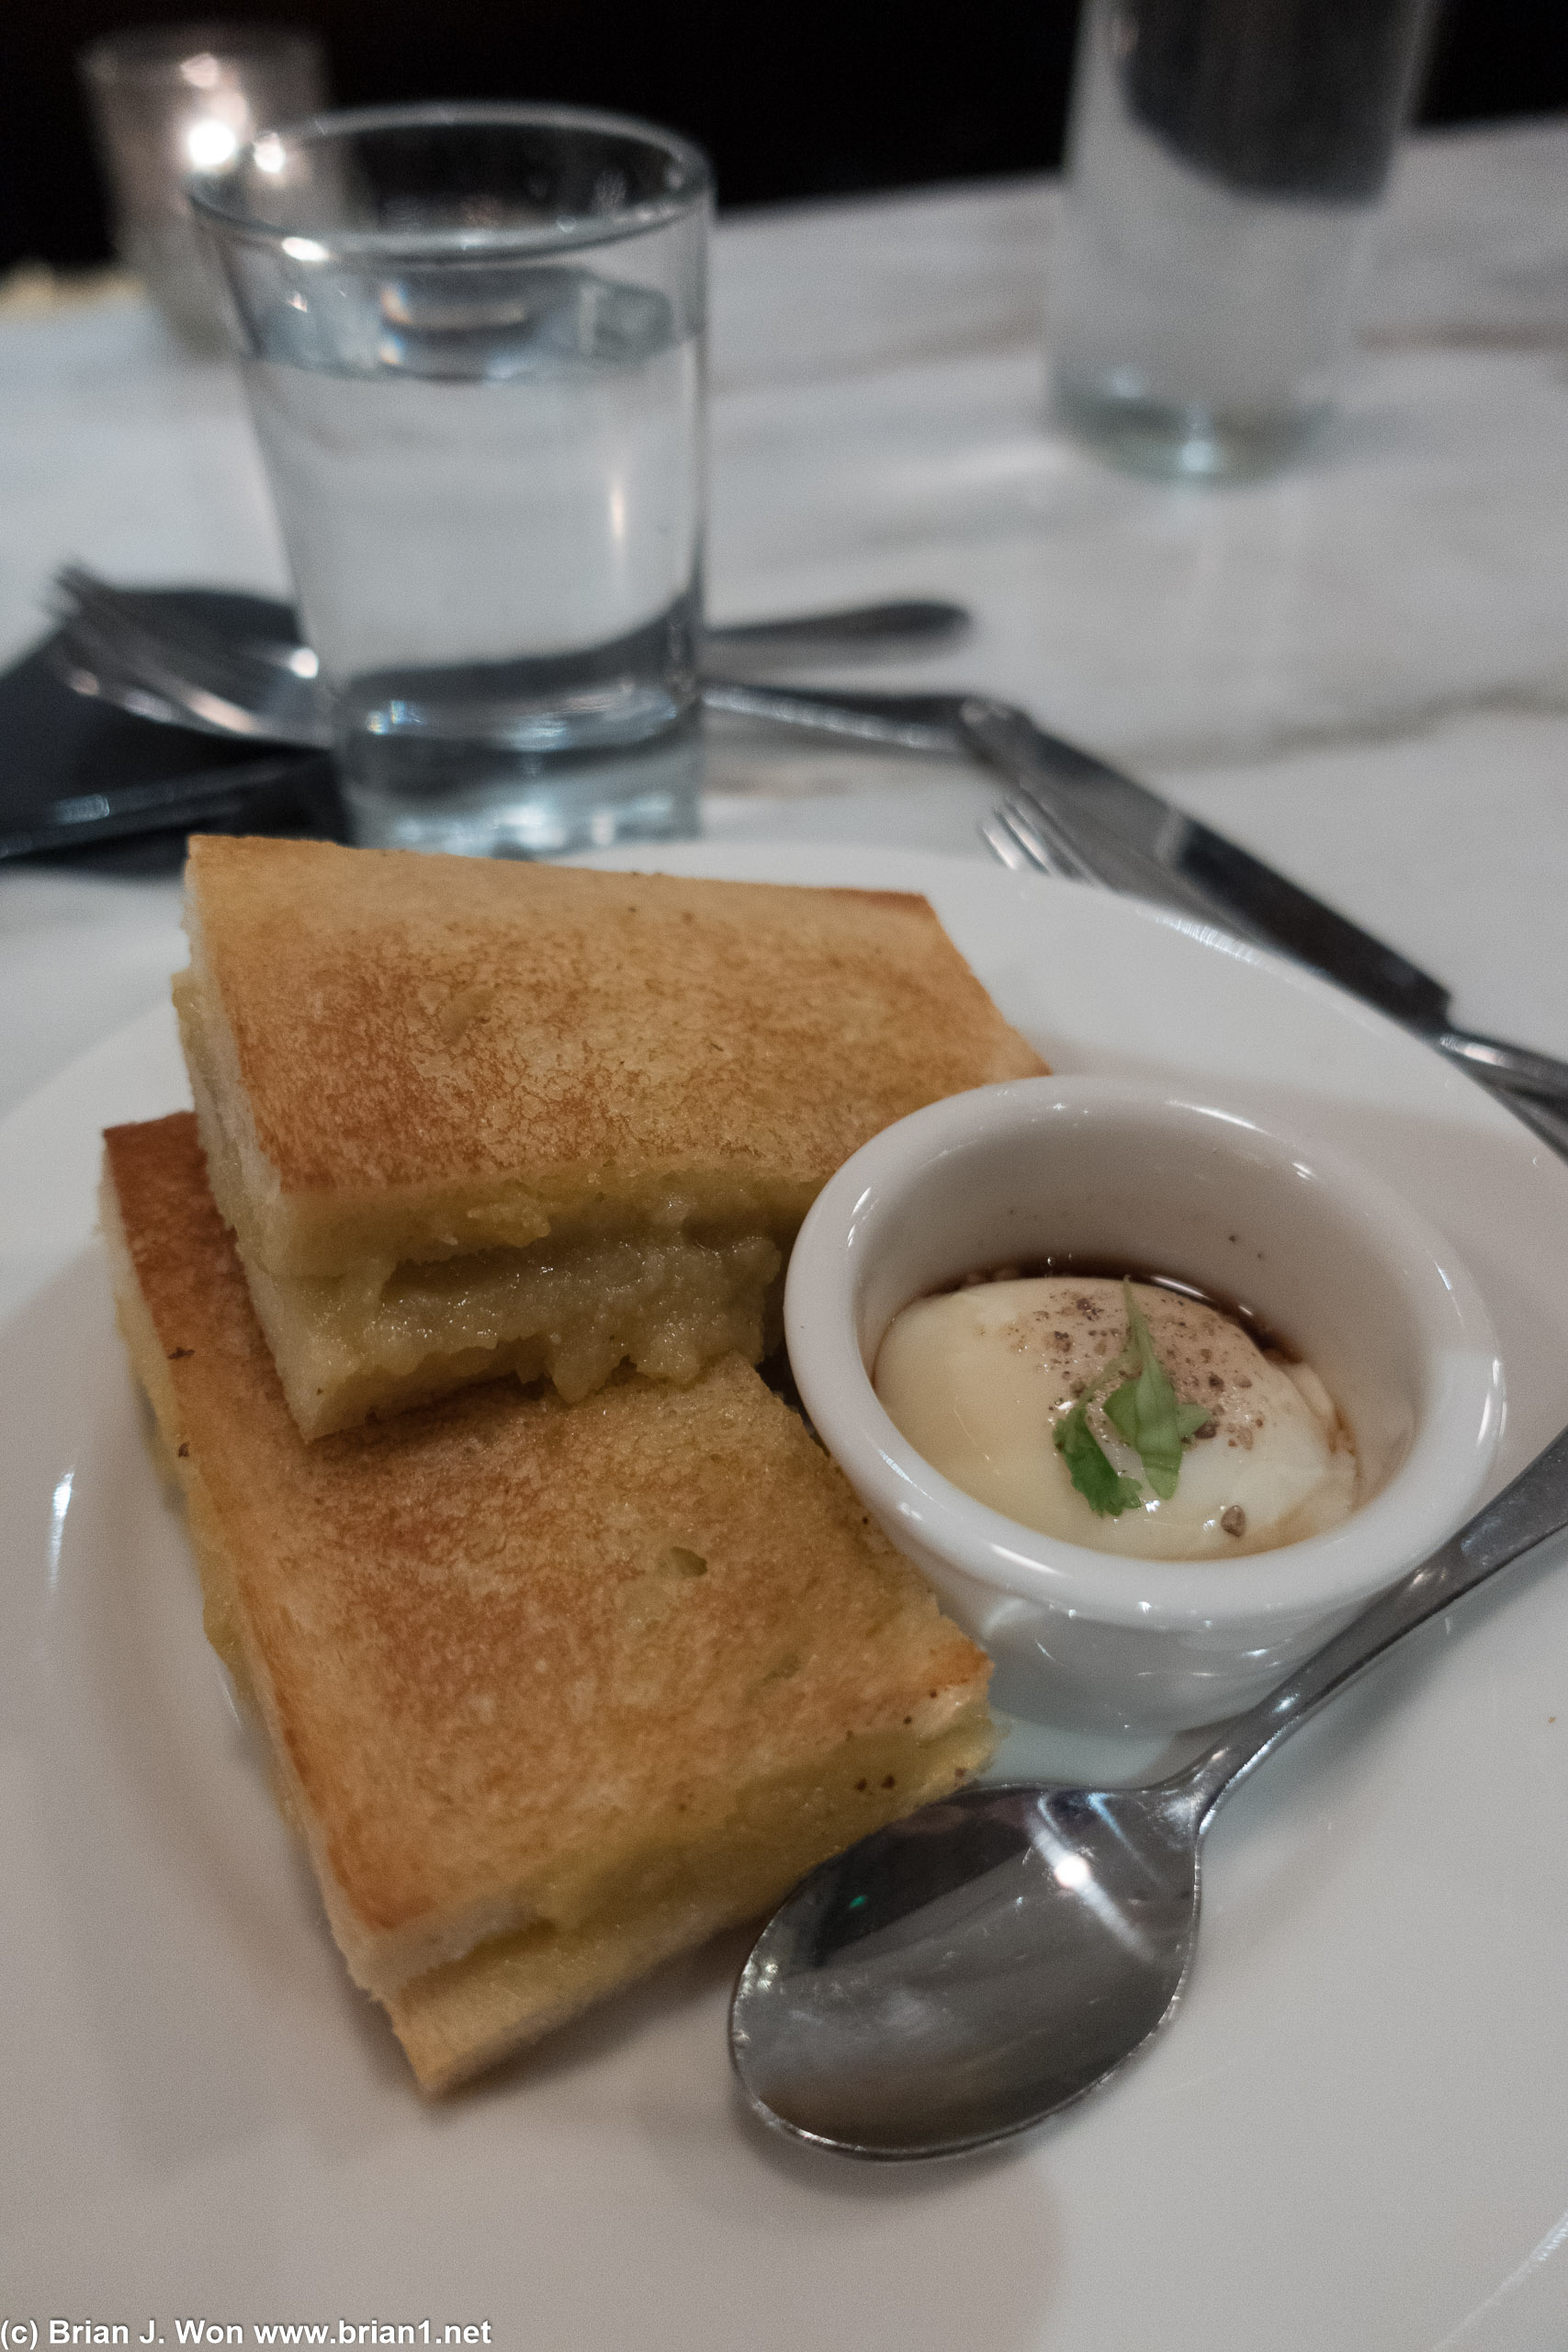 Free food started showing up...: fancy kaya toast. Quite good but not worth $16 if you had to pay for it.